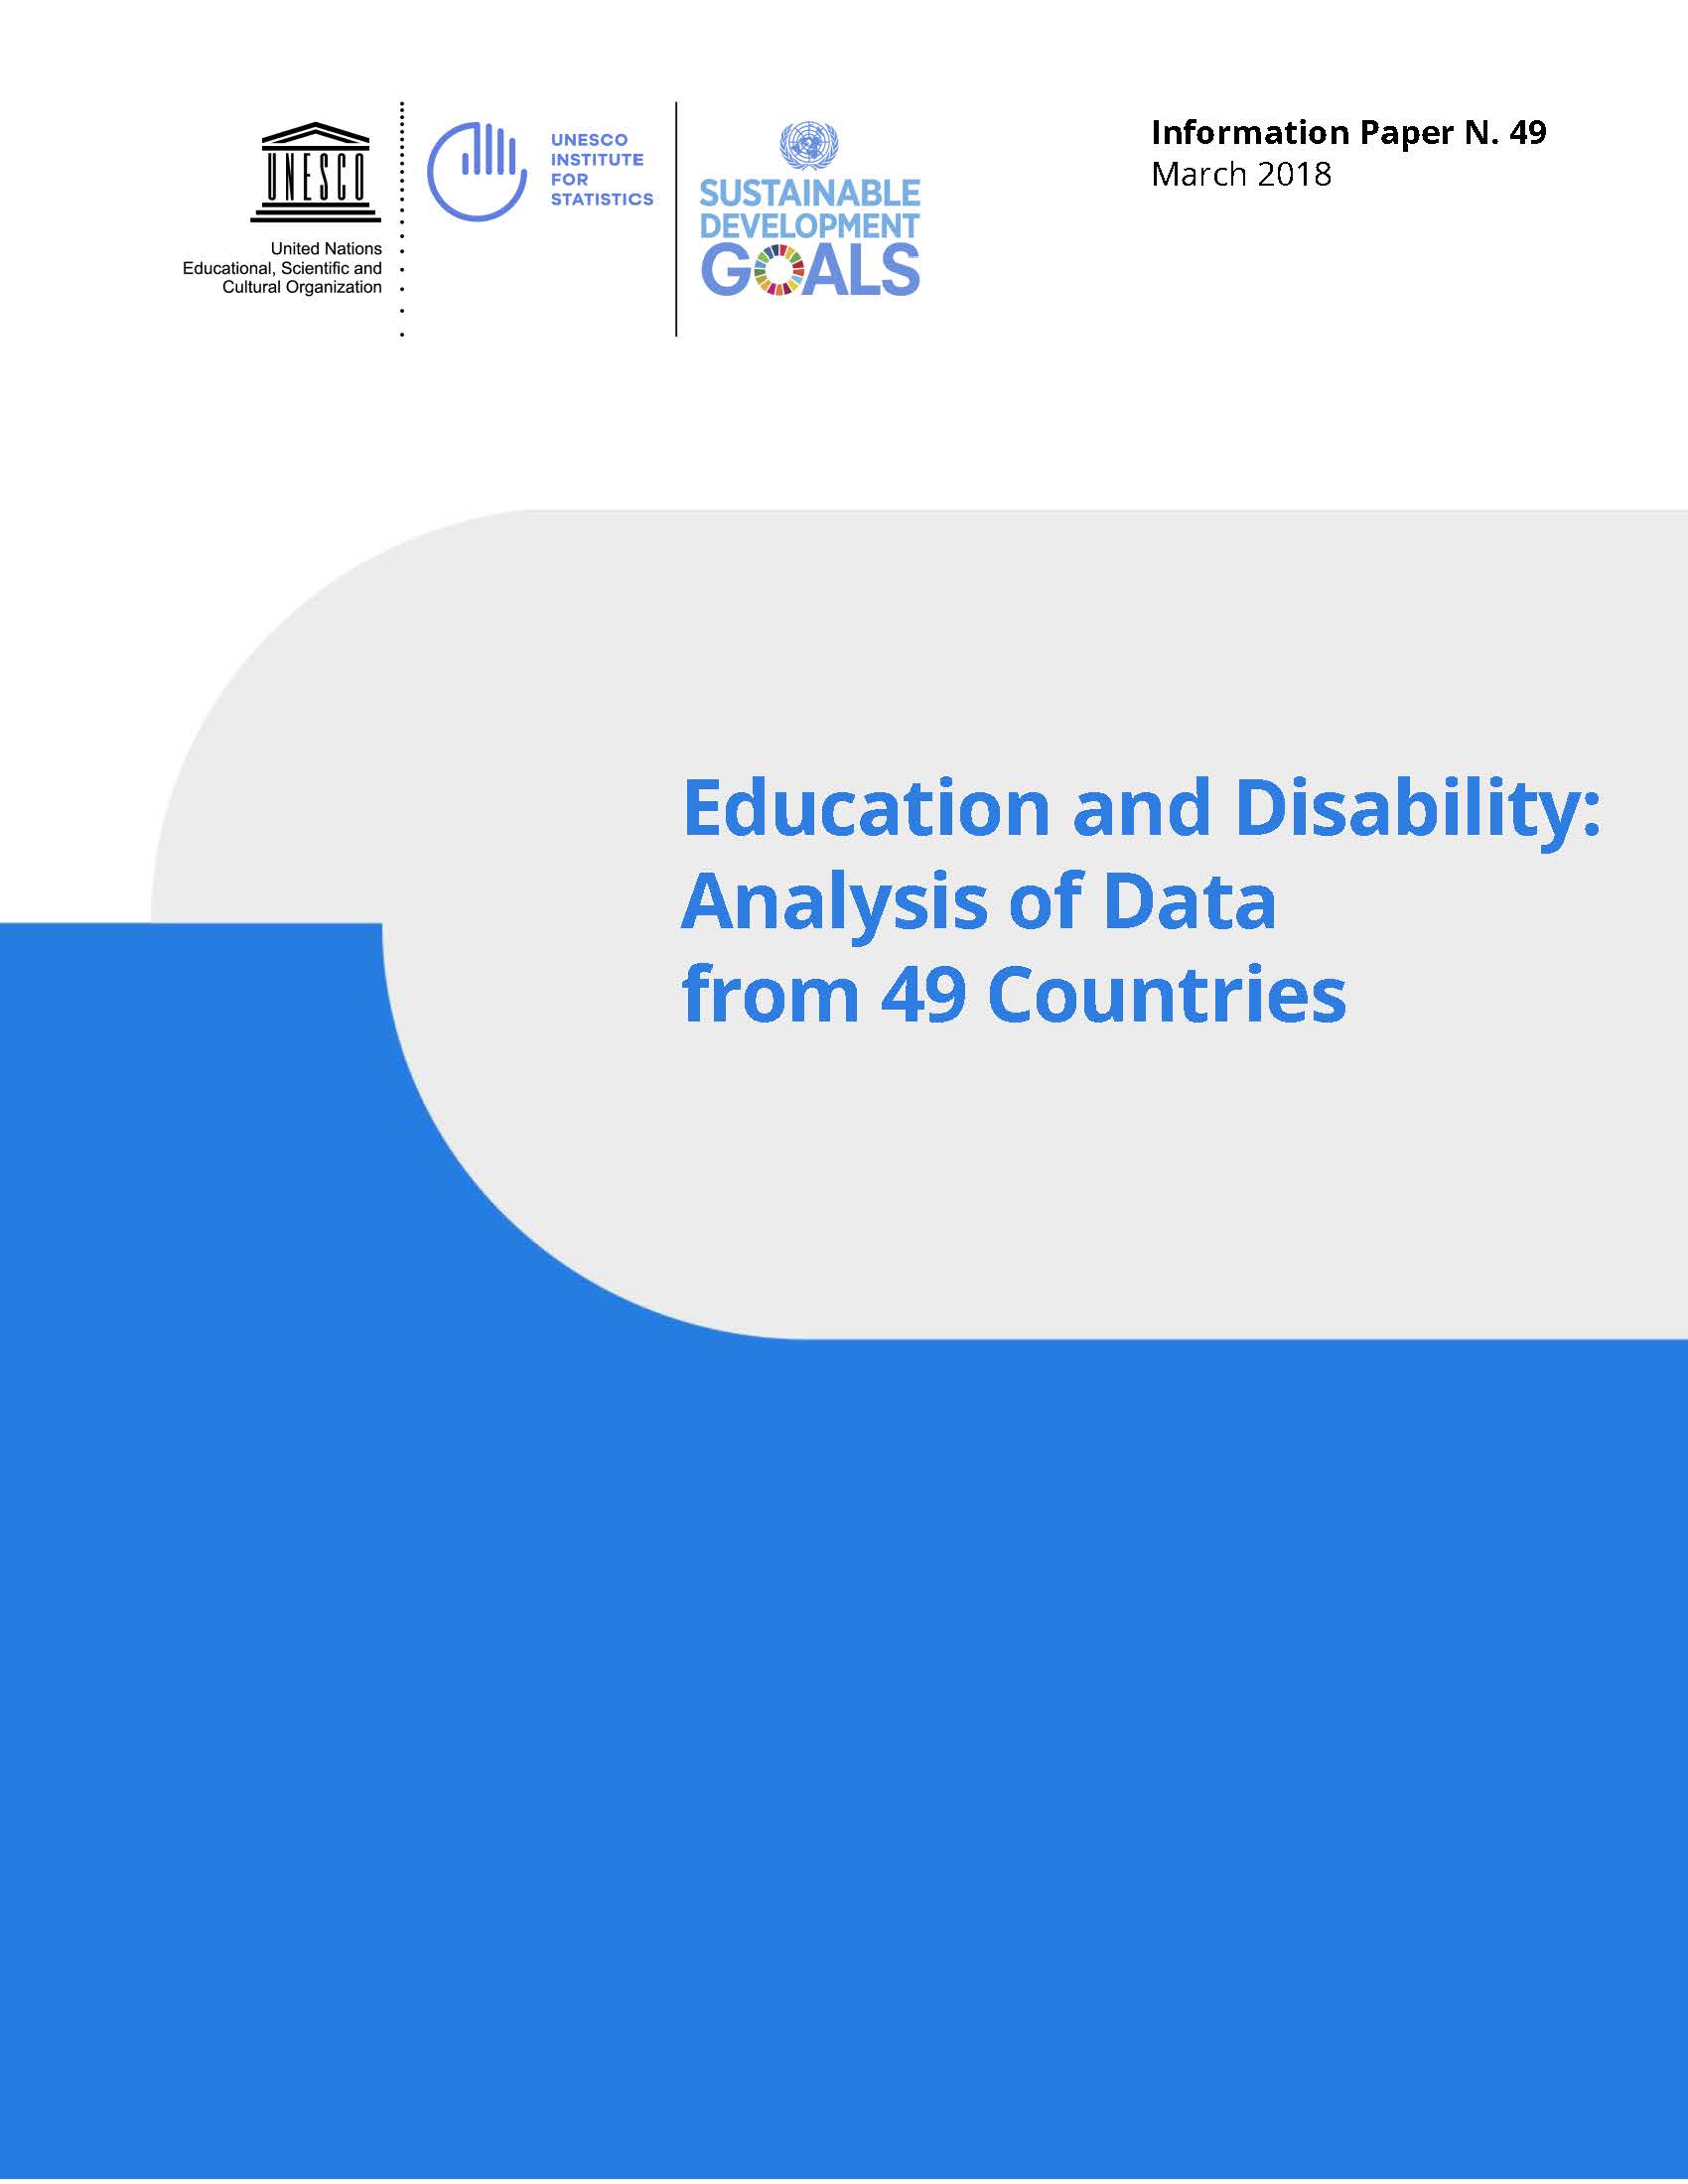 Education and disability: Analysis of data from 49 countries